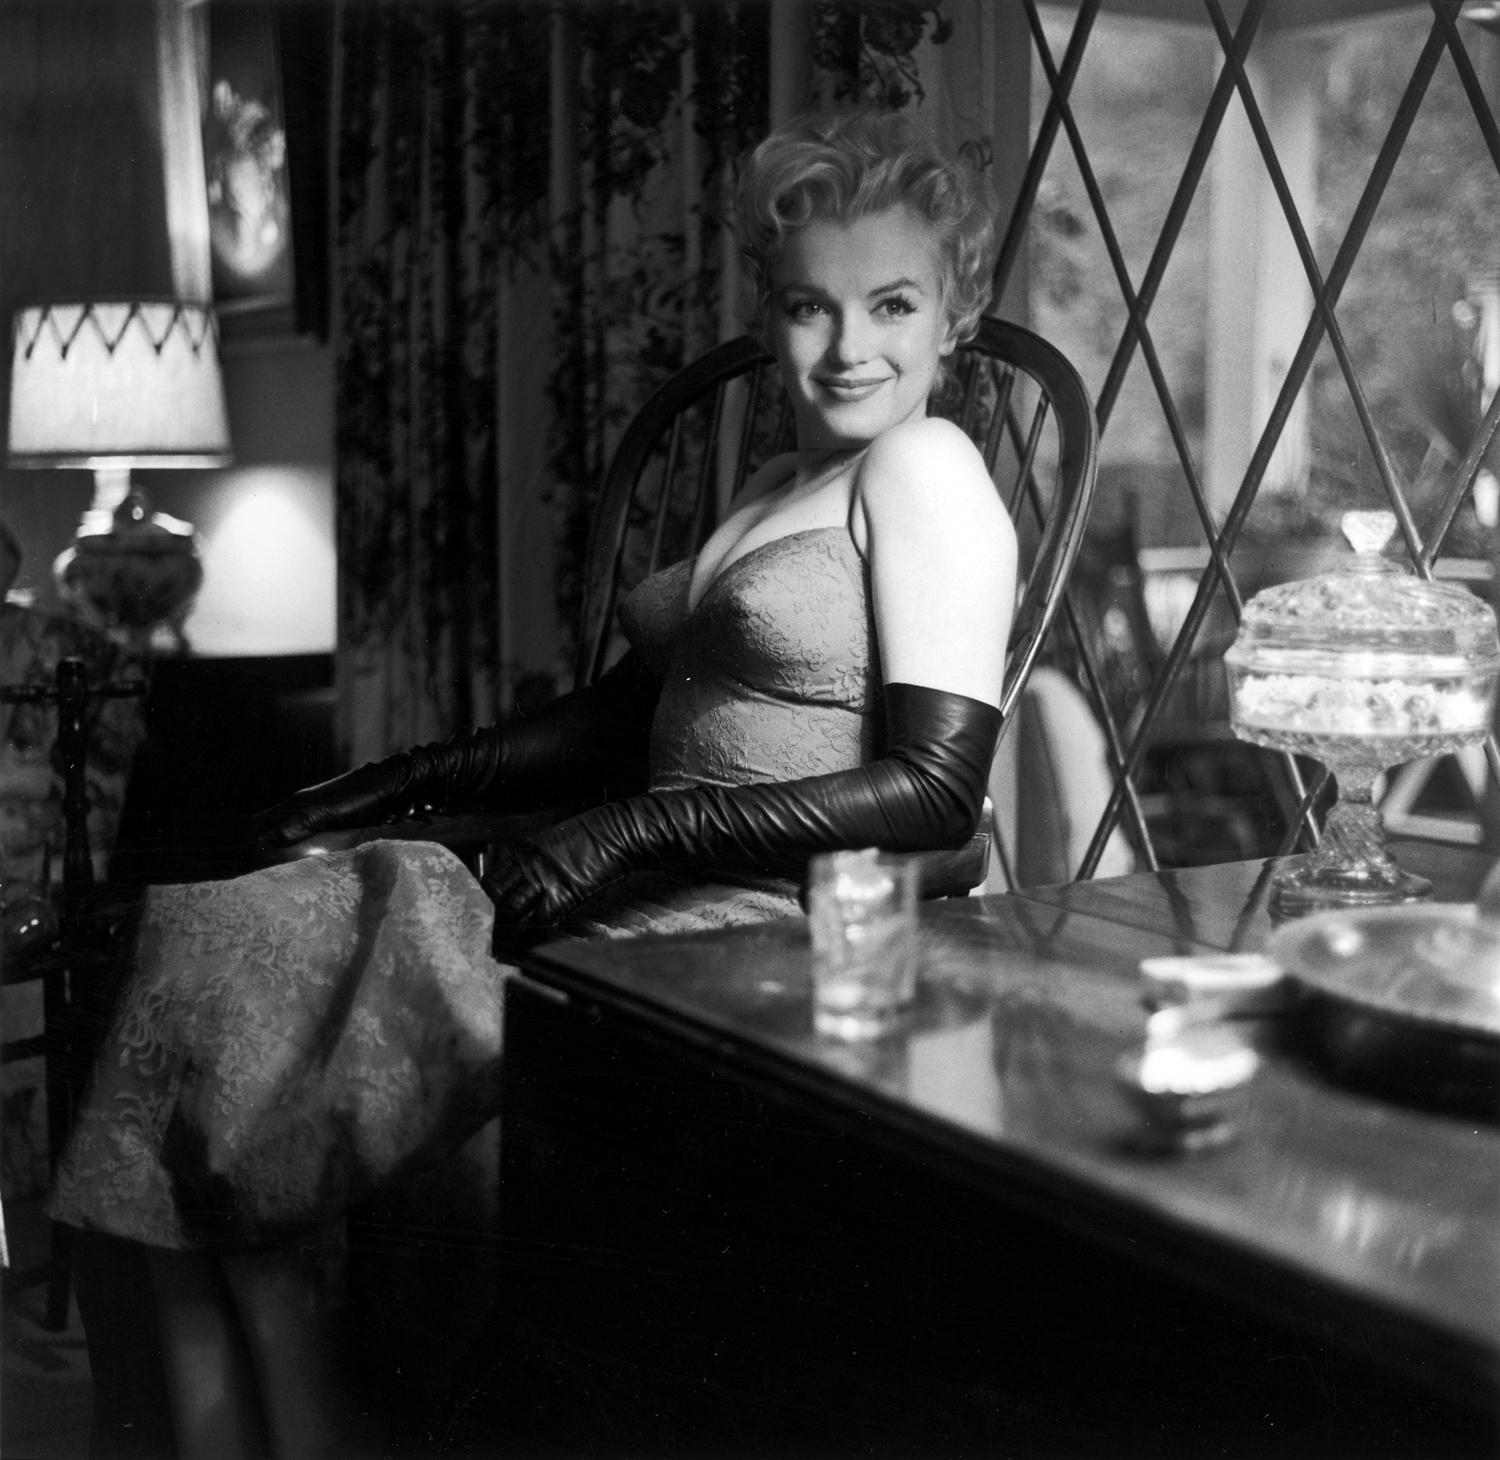 A 1955 image of Monroe posing by a window.